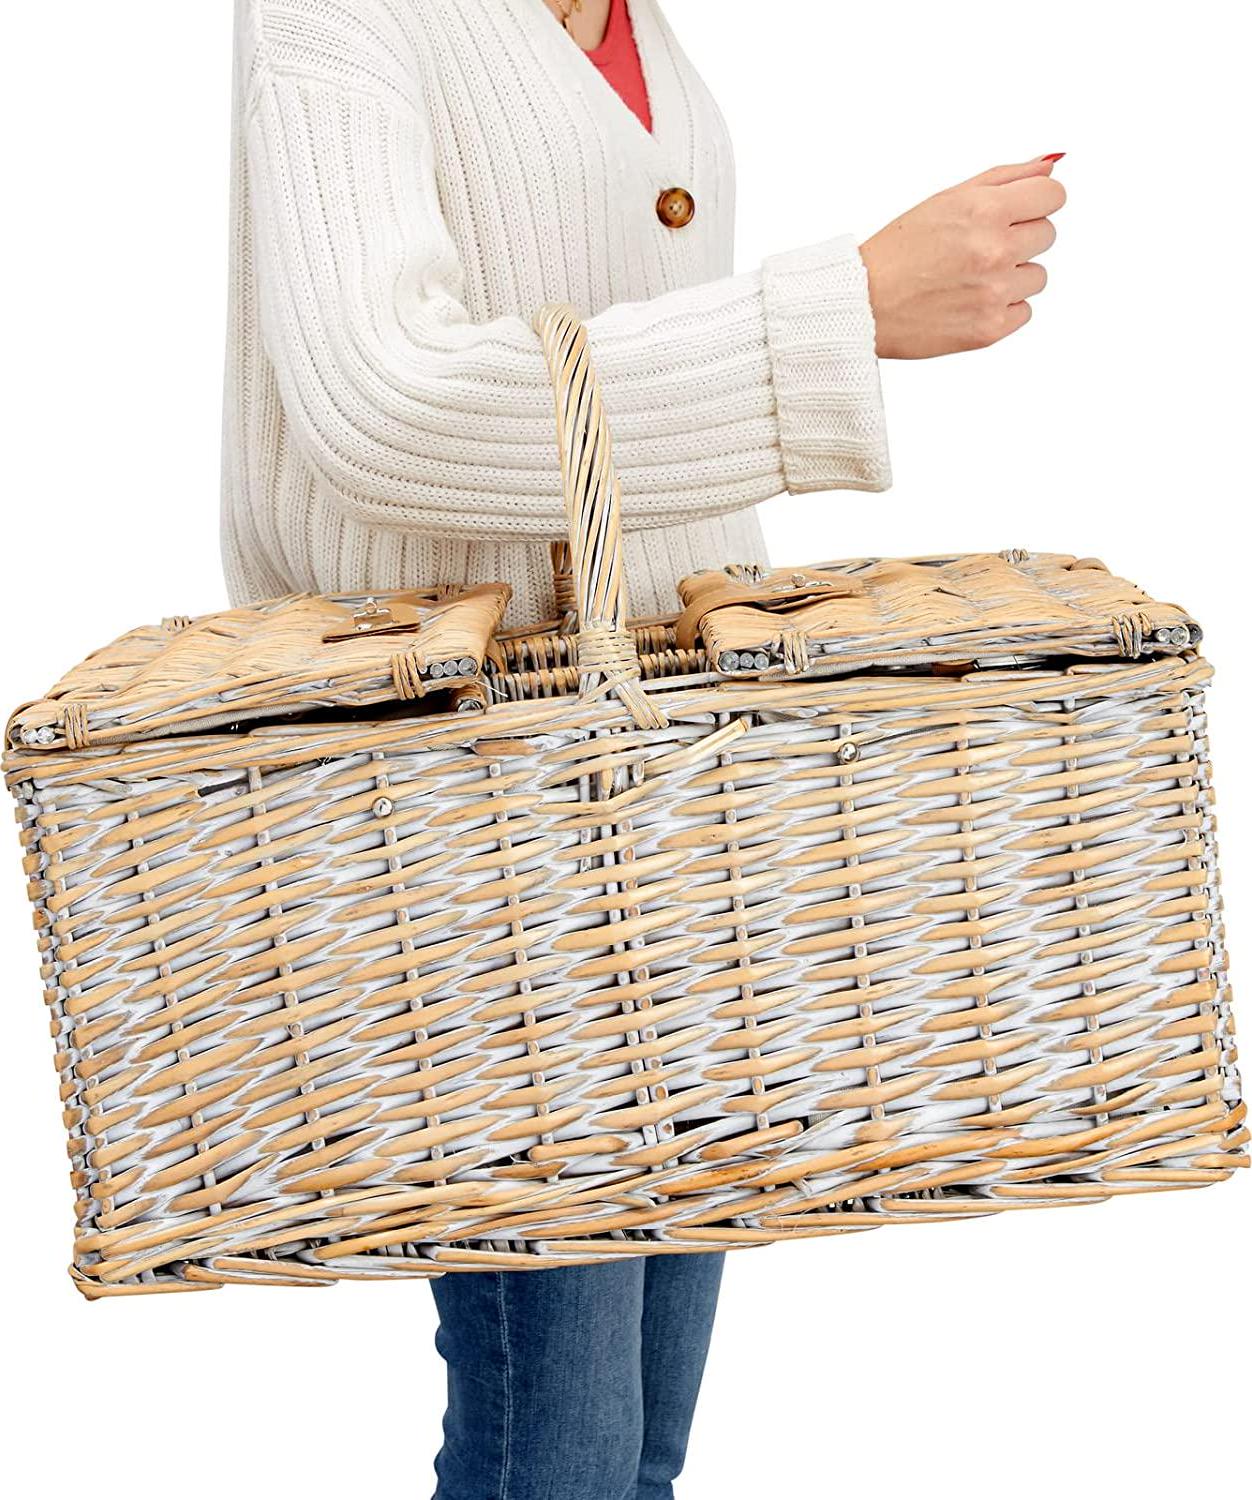 Wicker Picnic Basket Set for 4 with Insulated Cooler Bag, Metal Silverware, Salt/Pepper Shakers, and Corkscrew Wine Bottle Opener, Ceramic Plates